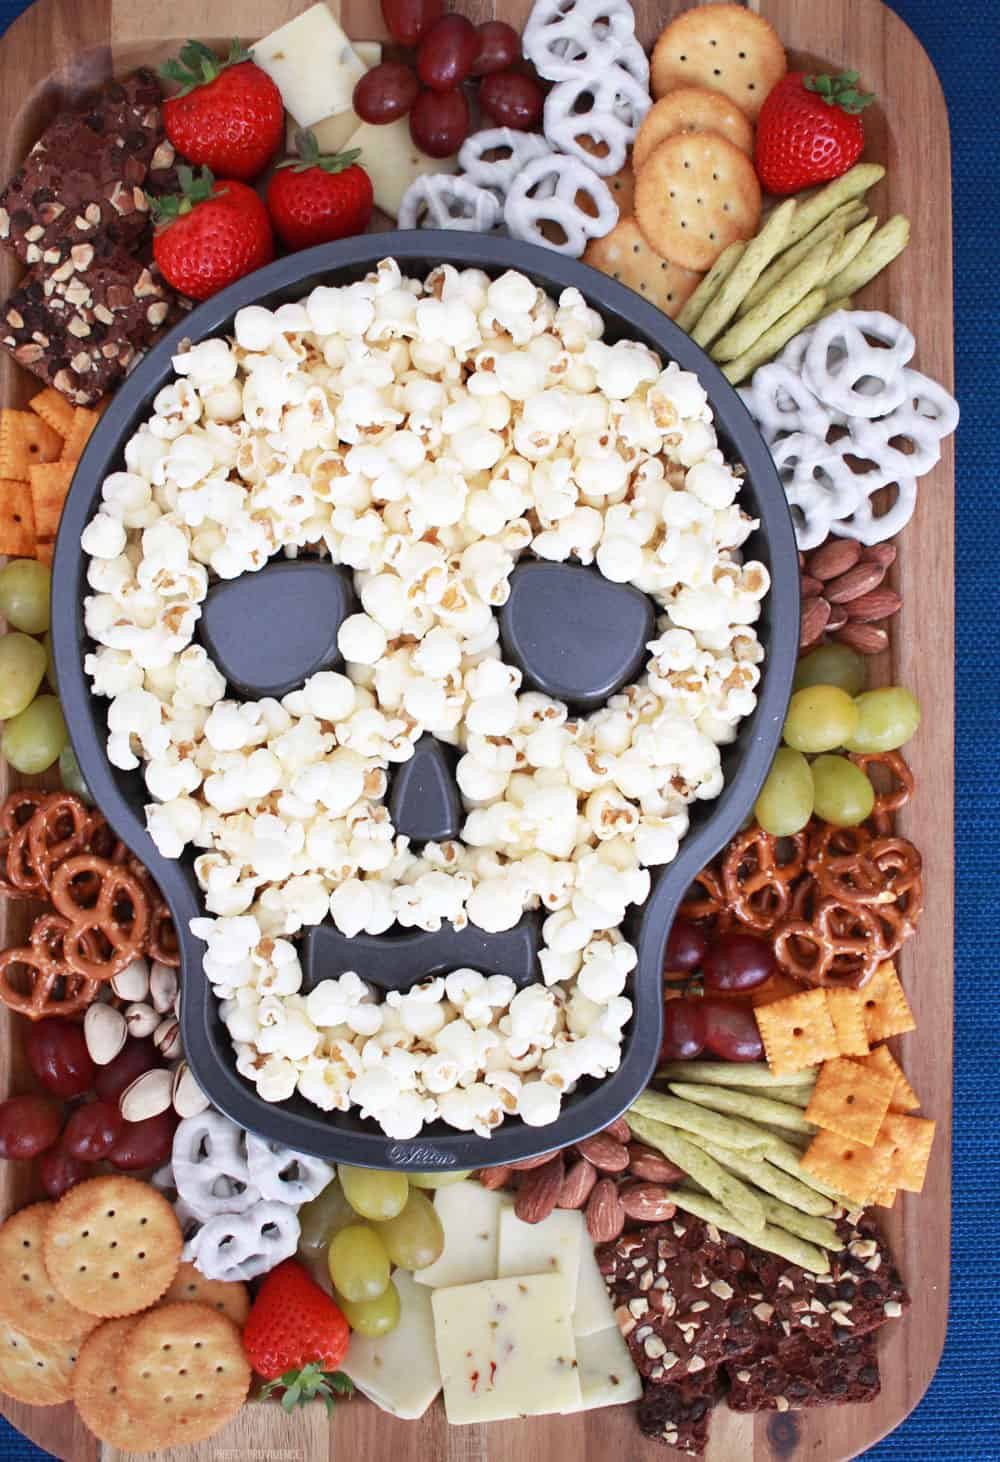 Halloween Party Snacks Ideas
 The BEST Halloween Party Treats Over the Big Moon